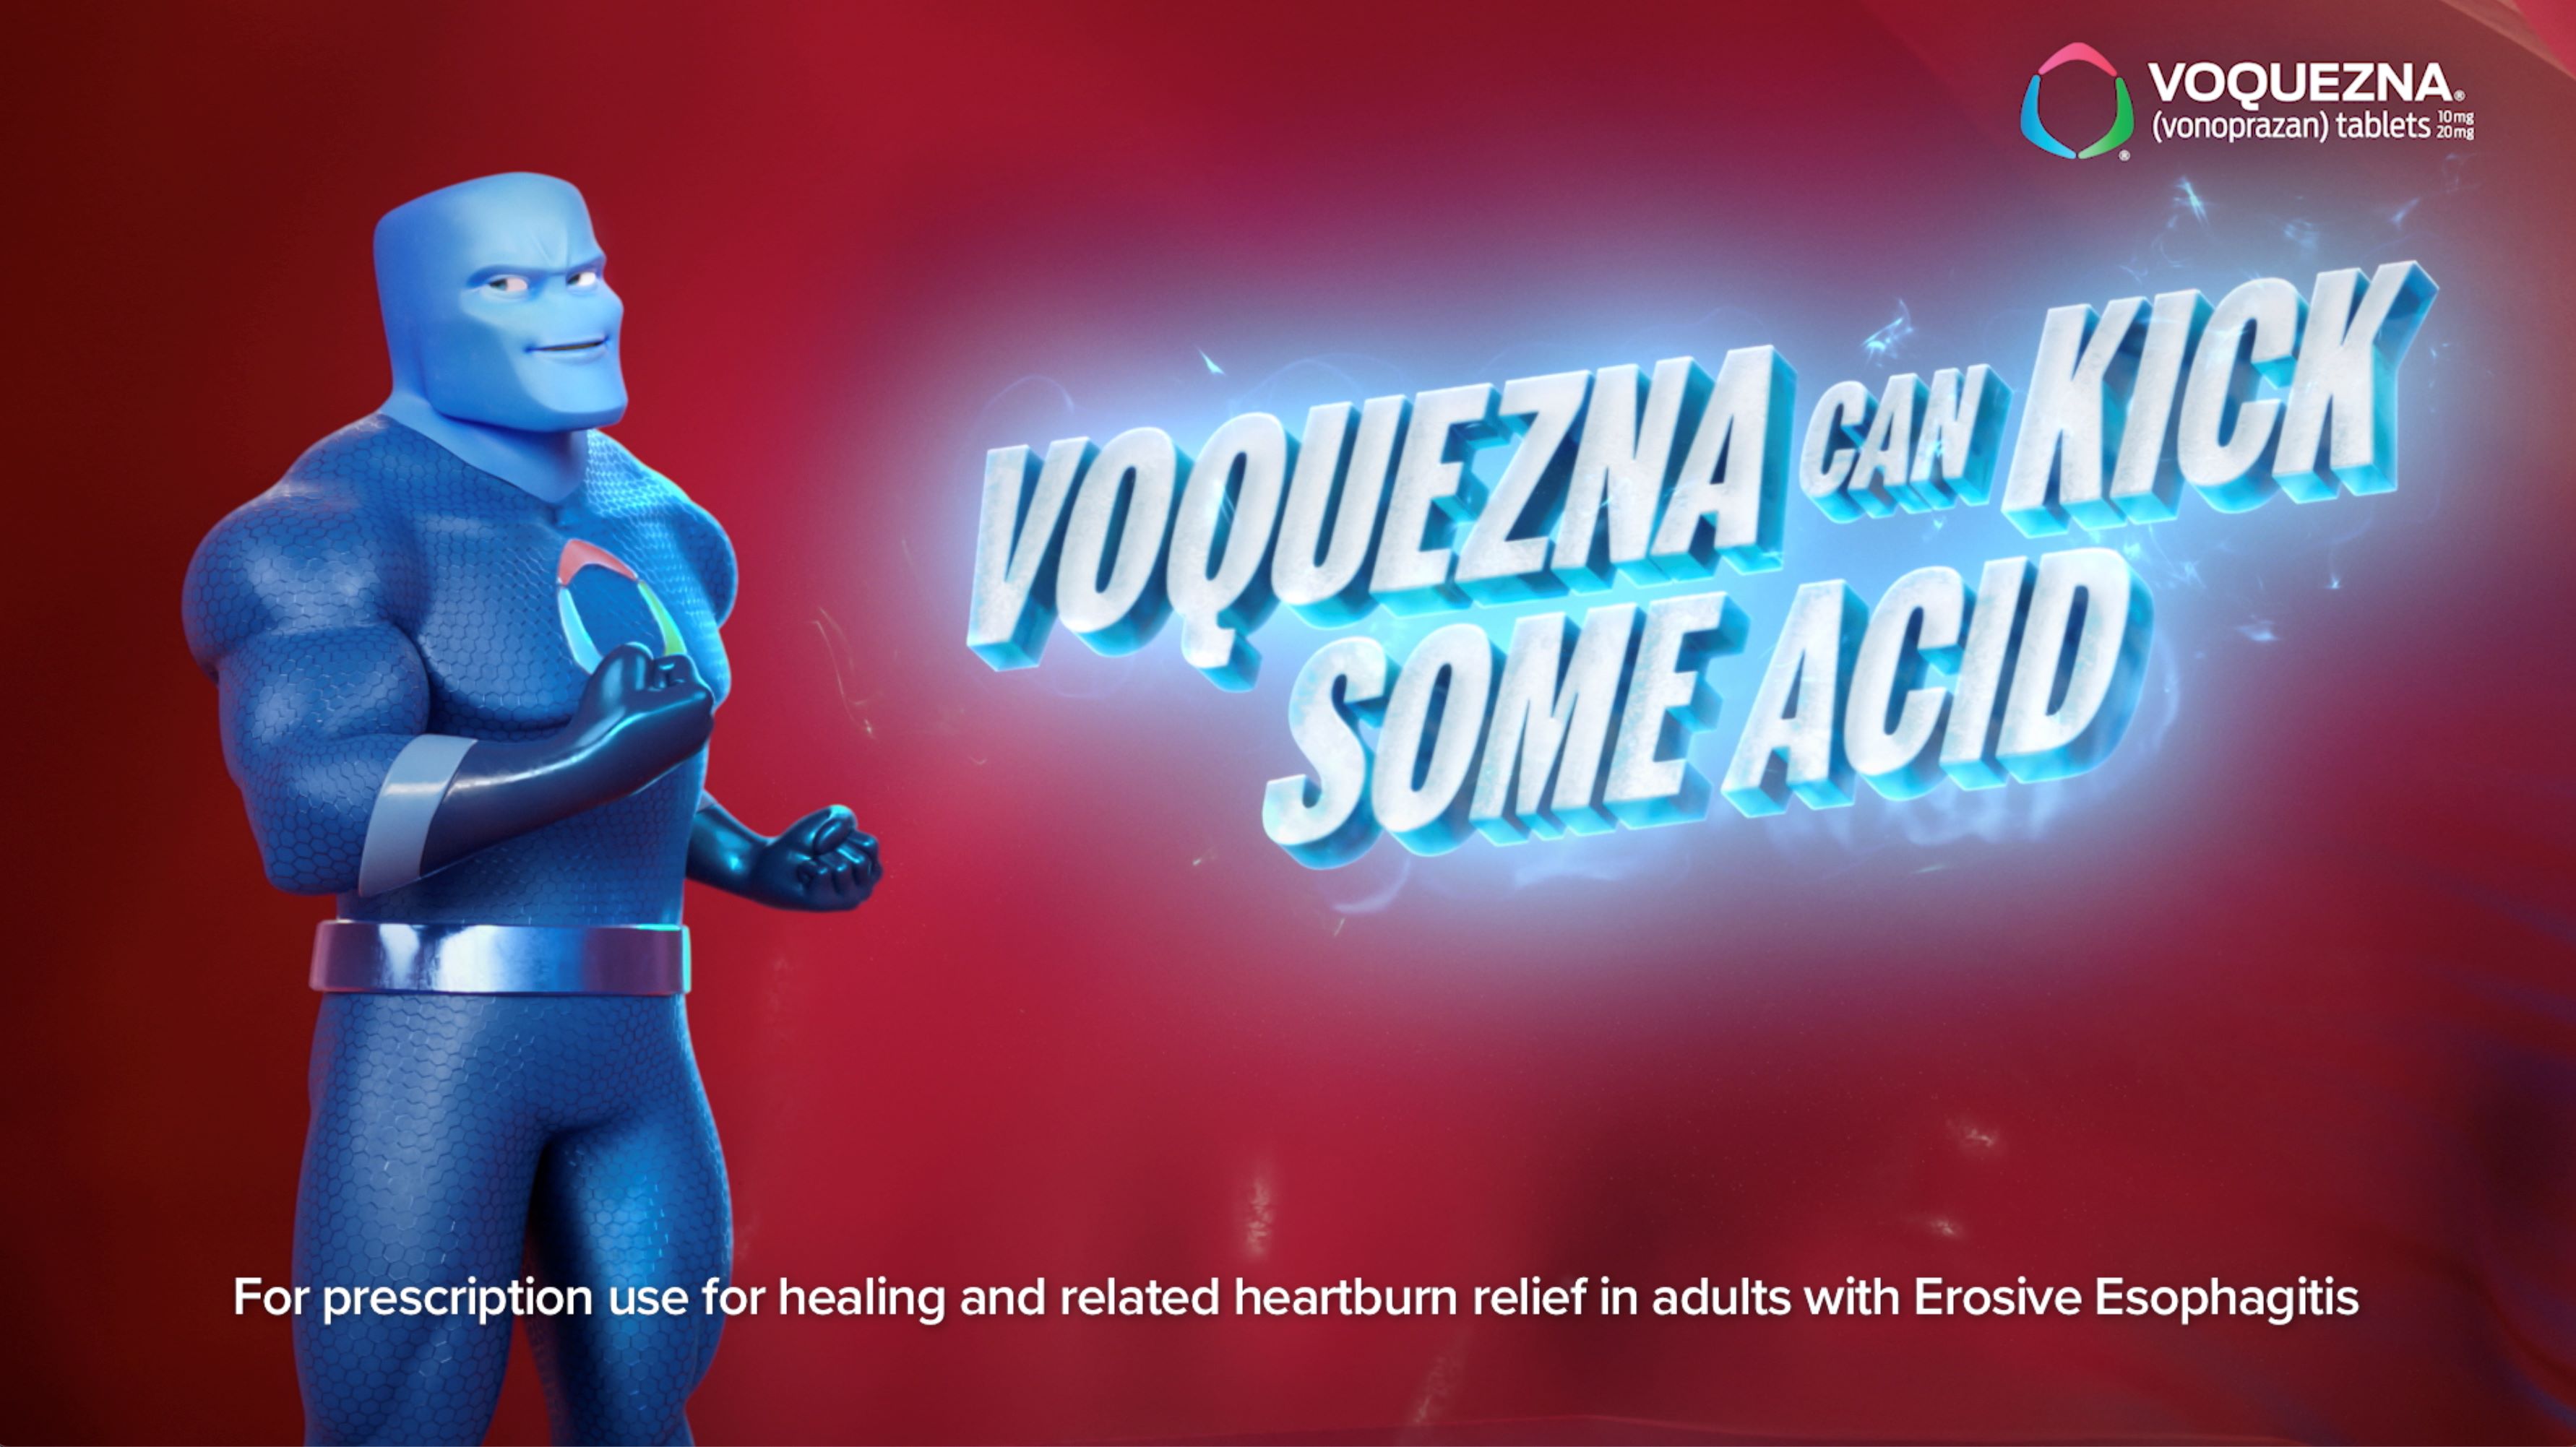 Phathom Pharmaceuticals aims to 'kick some acid' with first Voquezna campaign